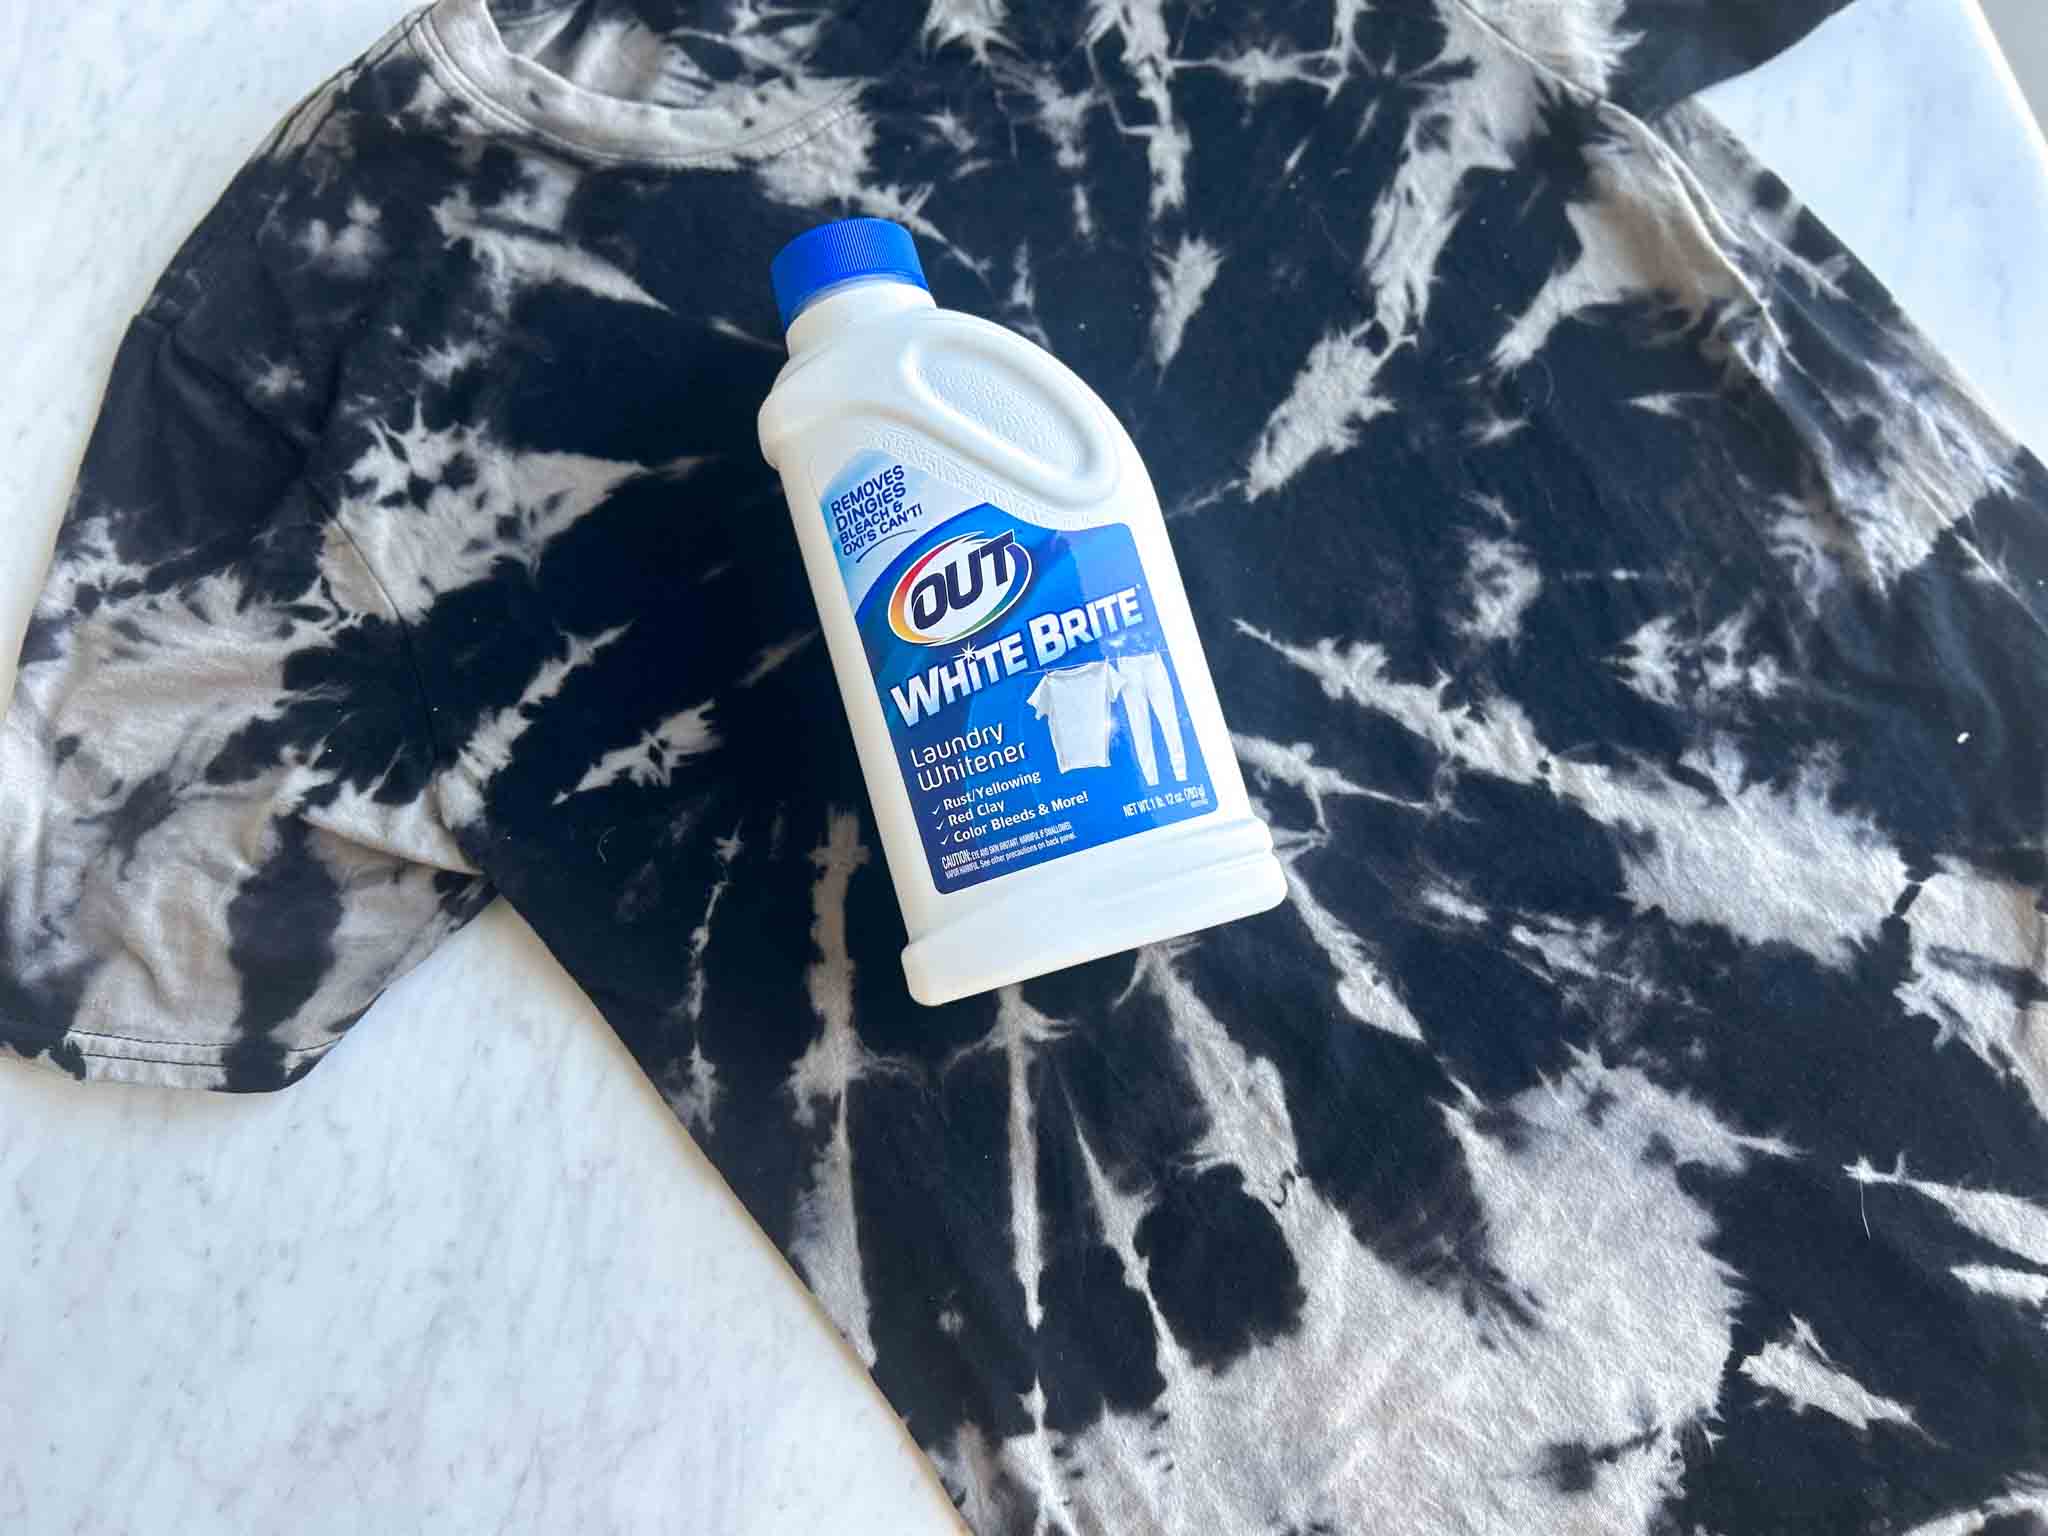 How to Reverse Dye with Out White Brite